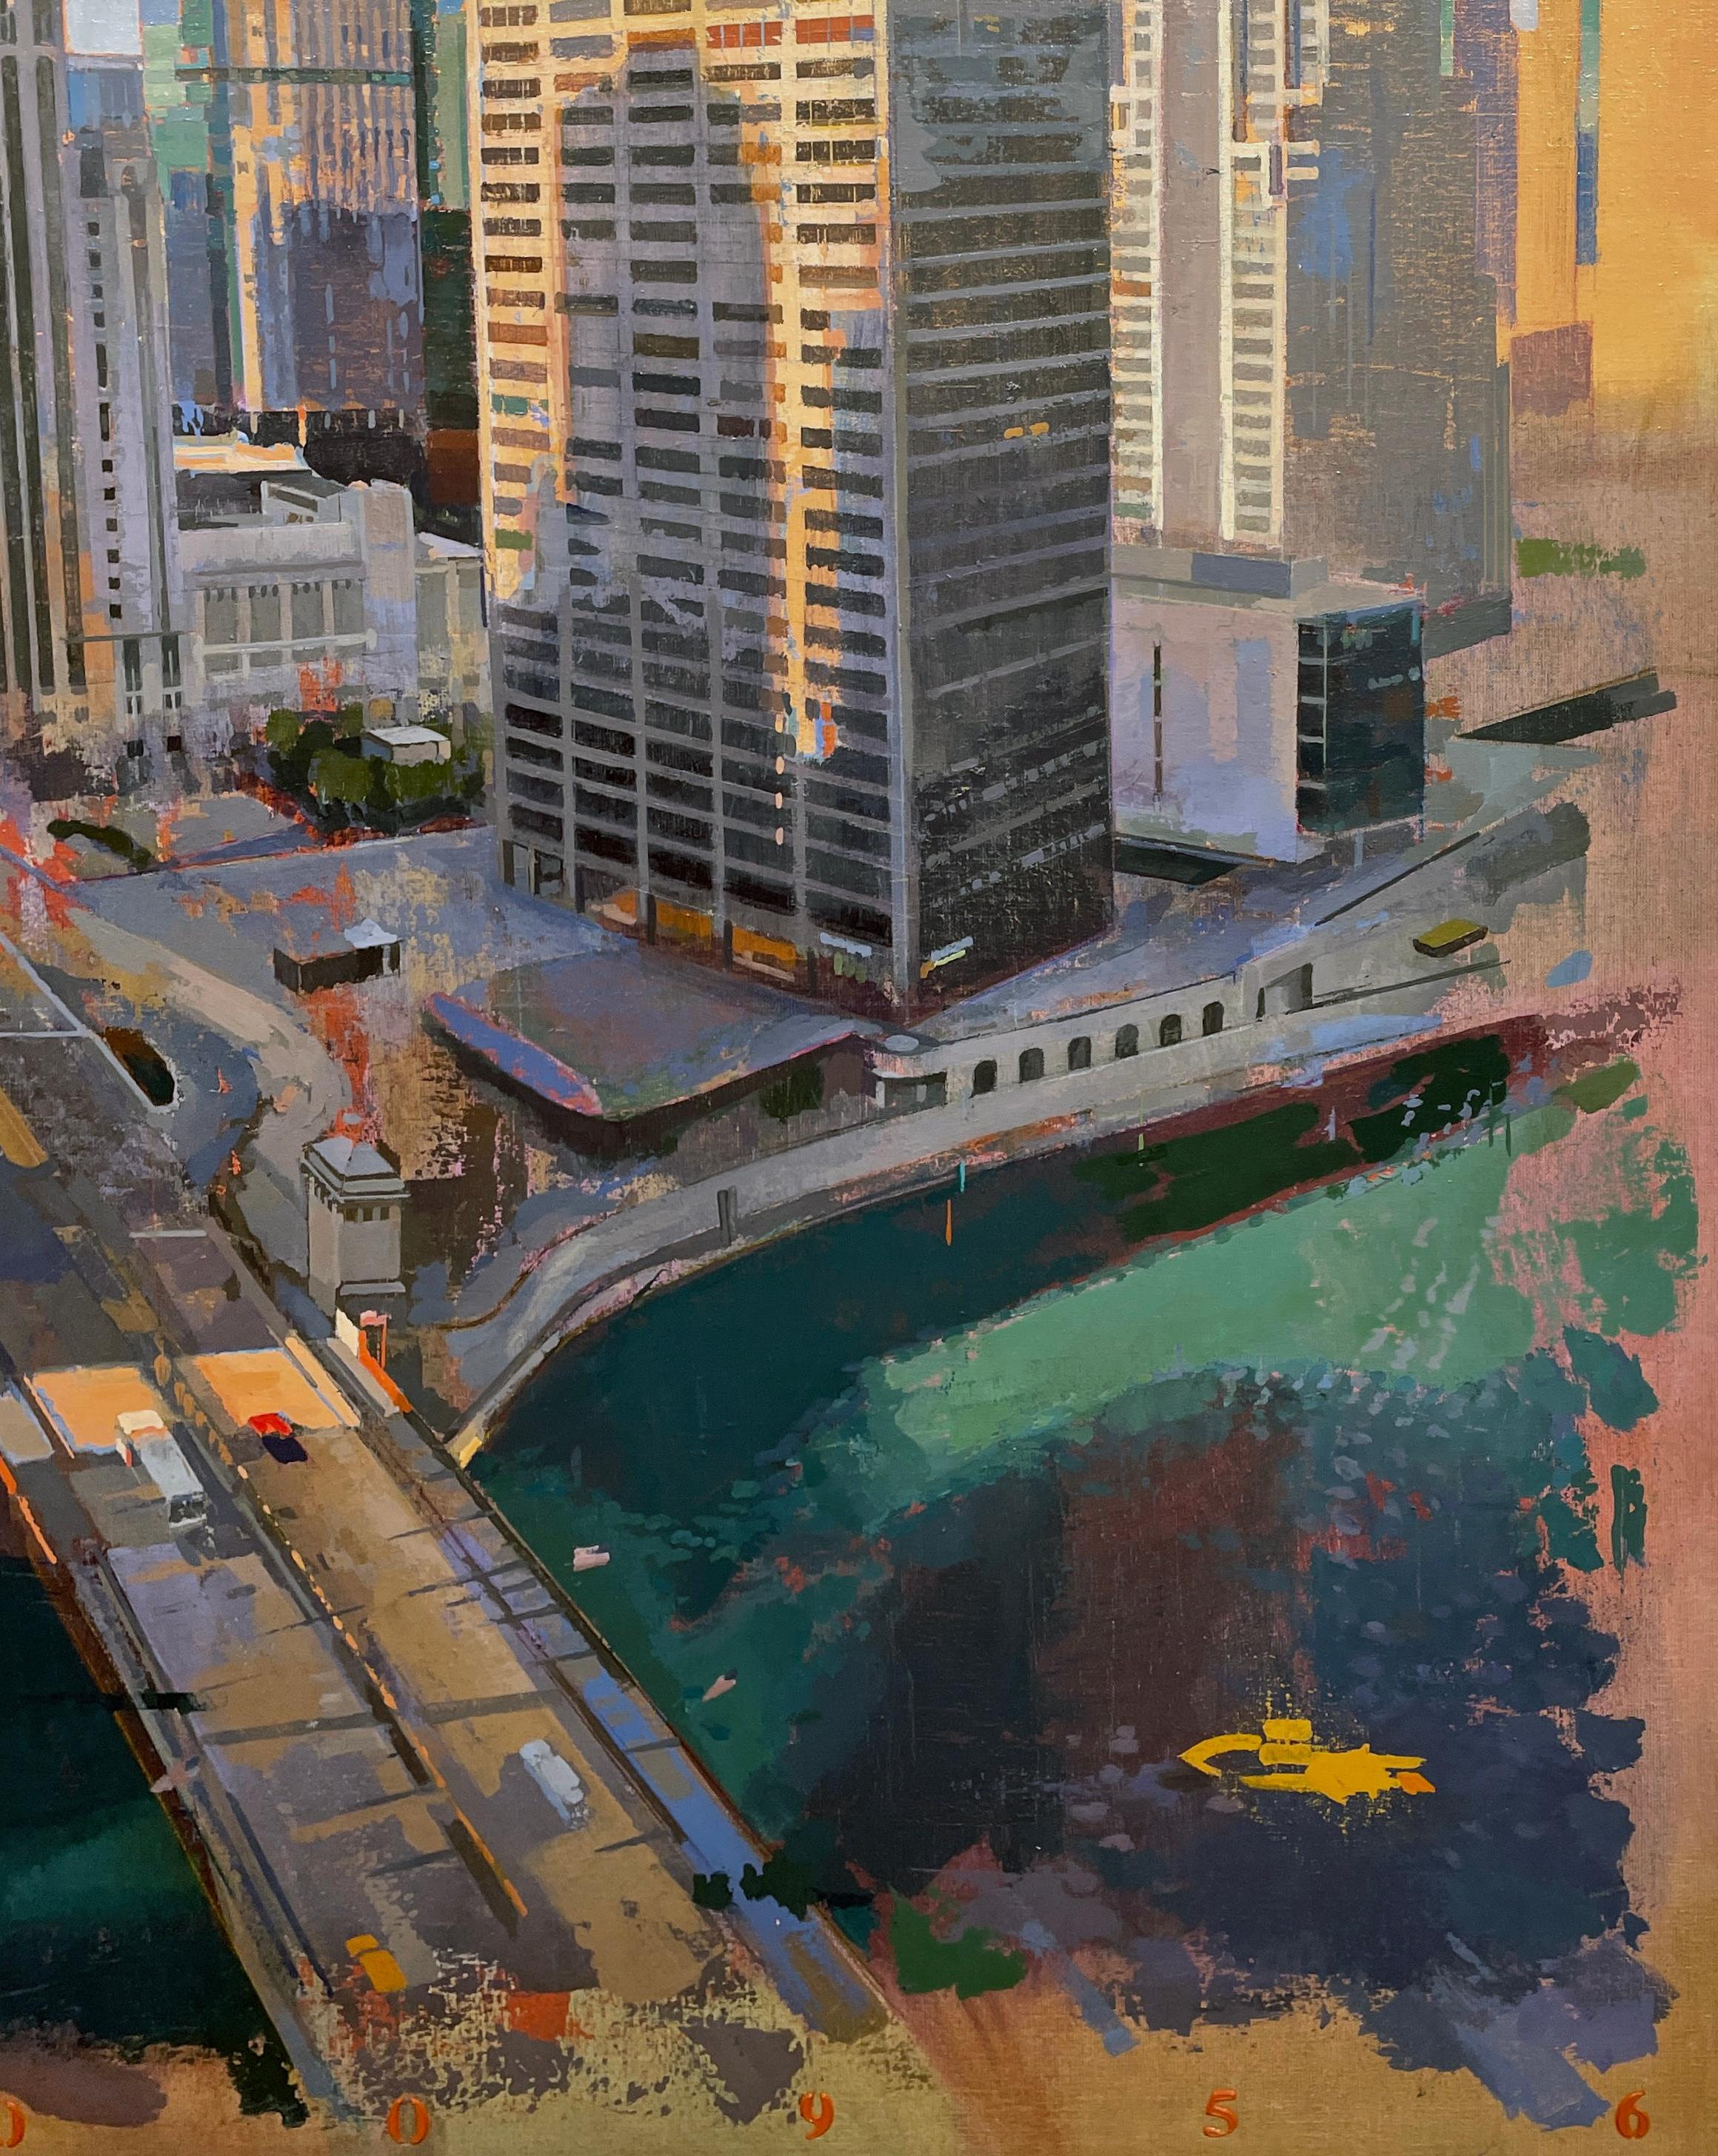 Chicago From London - Birds-Eye View From the London House Hotel, Chicago, IL - Contemporary Painting by Albert Vidal Moreno